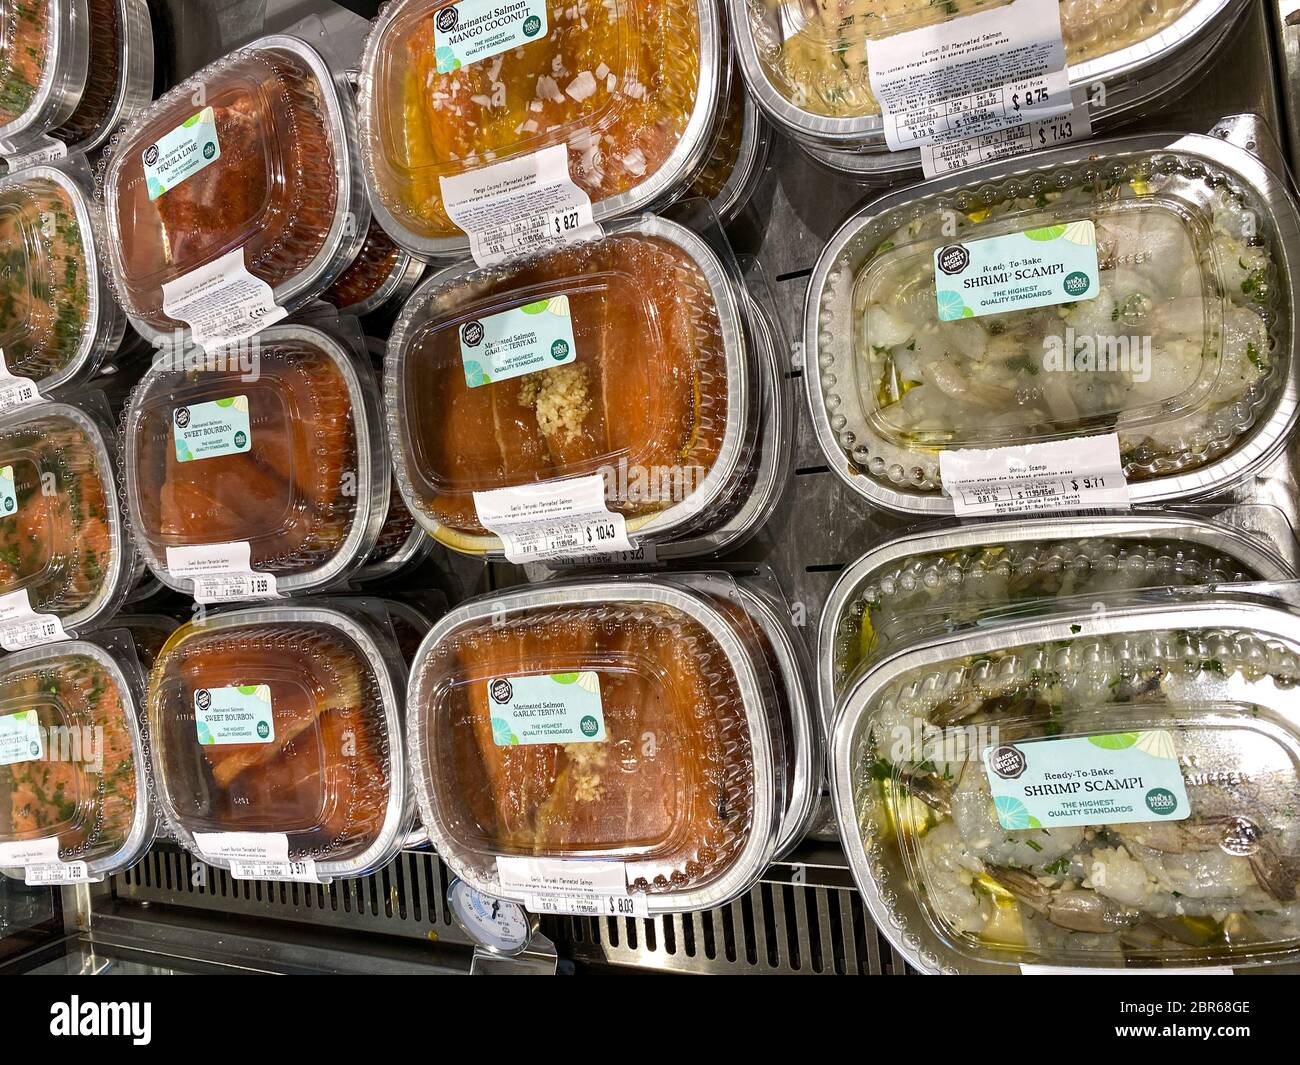 Orlando, FL/USA-5/3/20: A display of ready to bake seafood dinners at a Whole  Foods Market grocery store waiting for customers to purchase Stock Photo -  Alamy